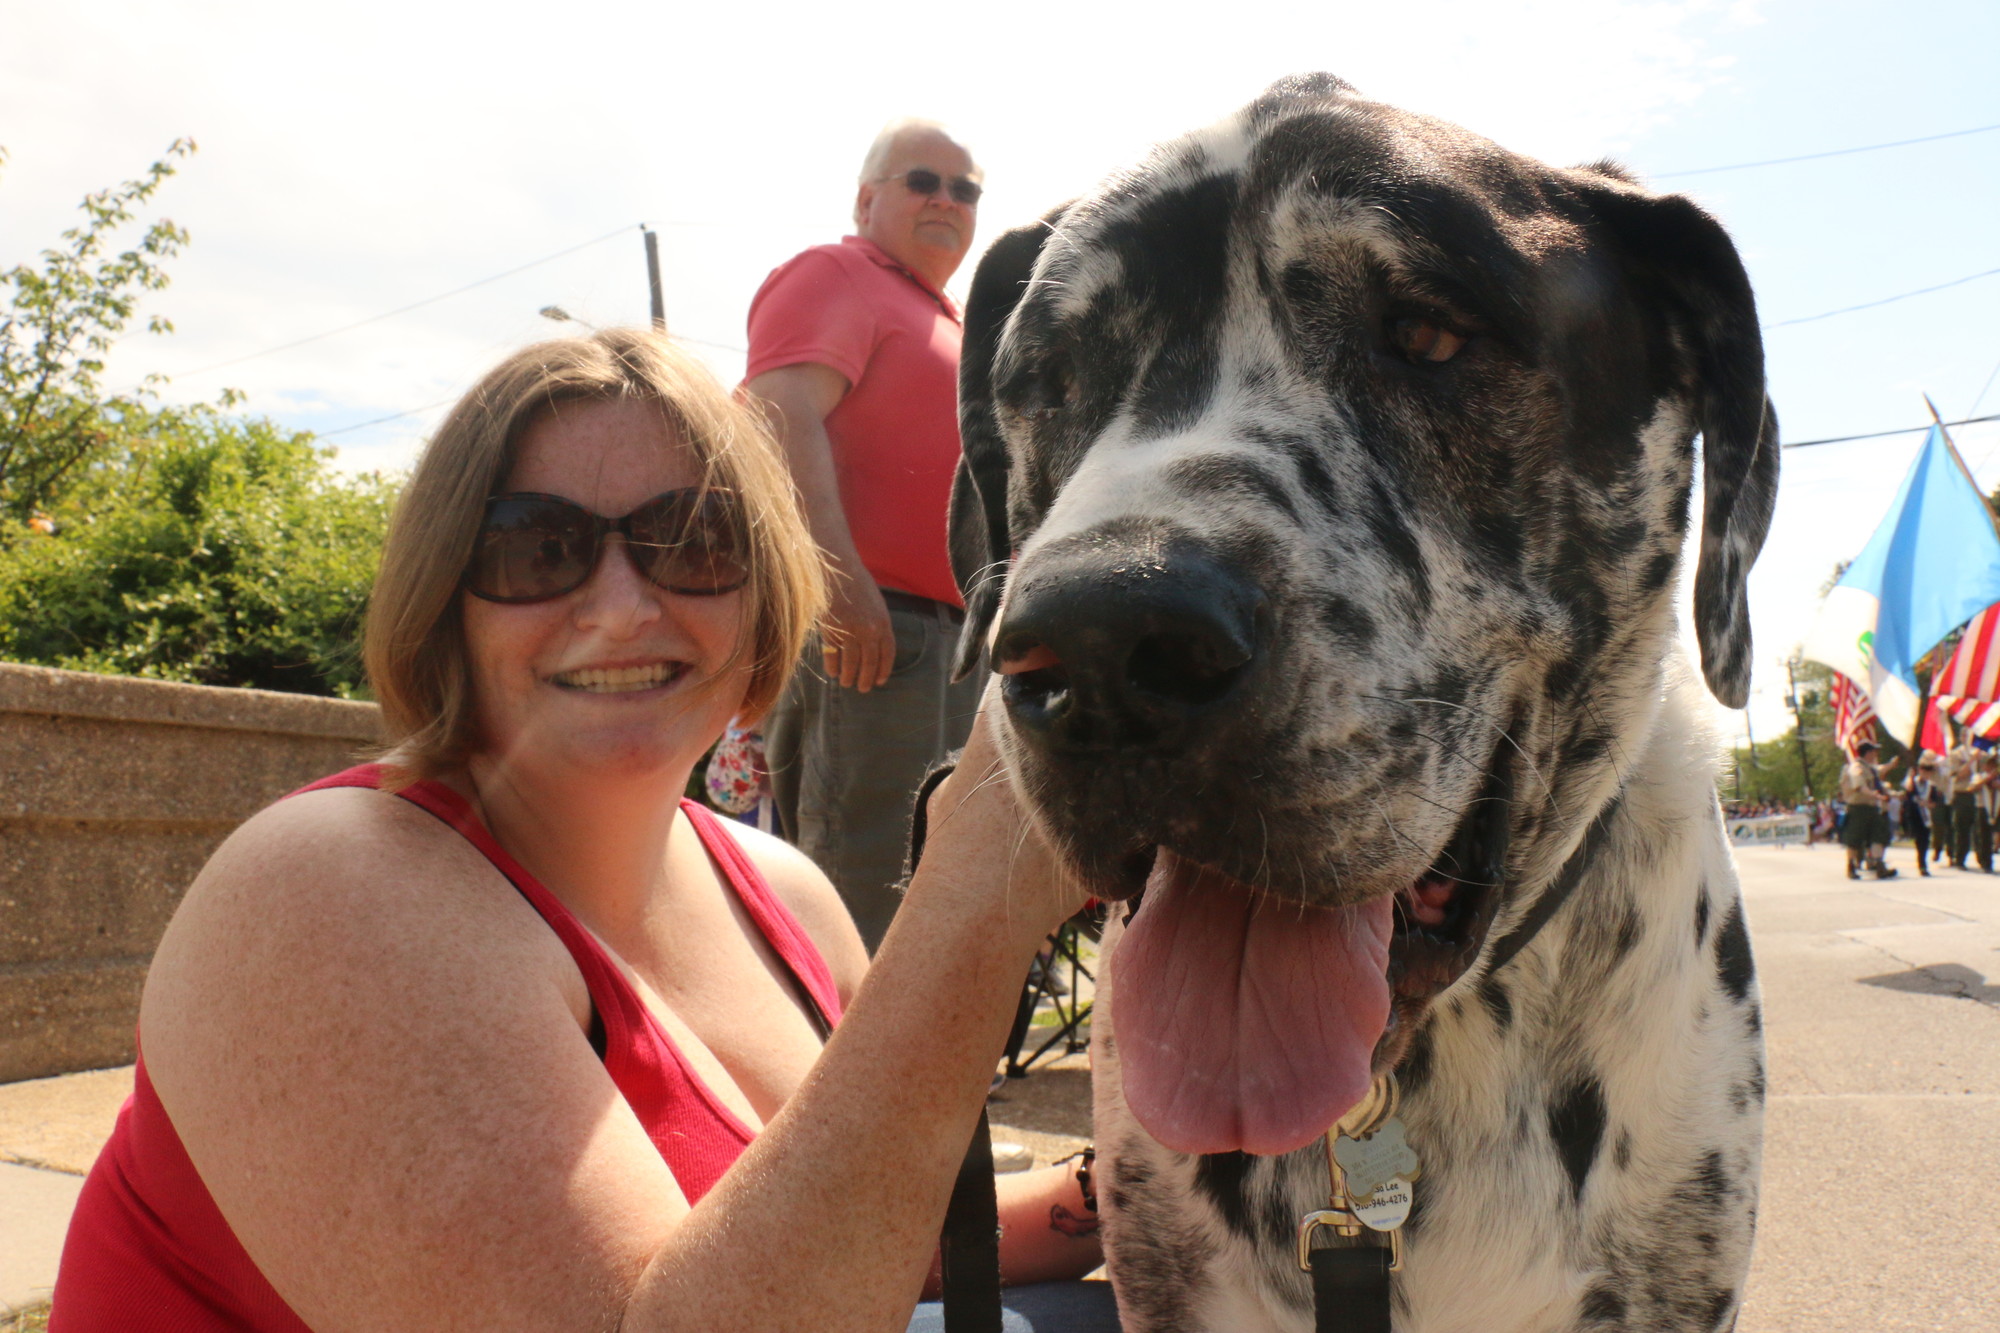 Valley Stream resident Teresa Lee watched the parade with her humongous dog, Dexter. He turned many a marcher’s head.